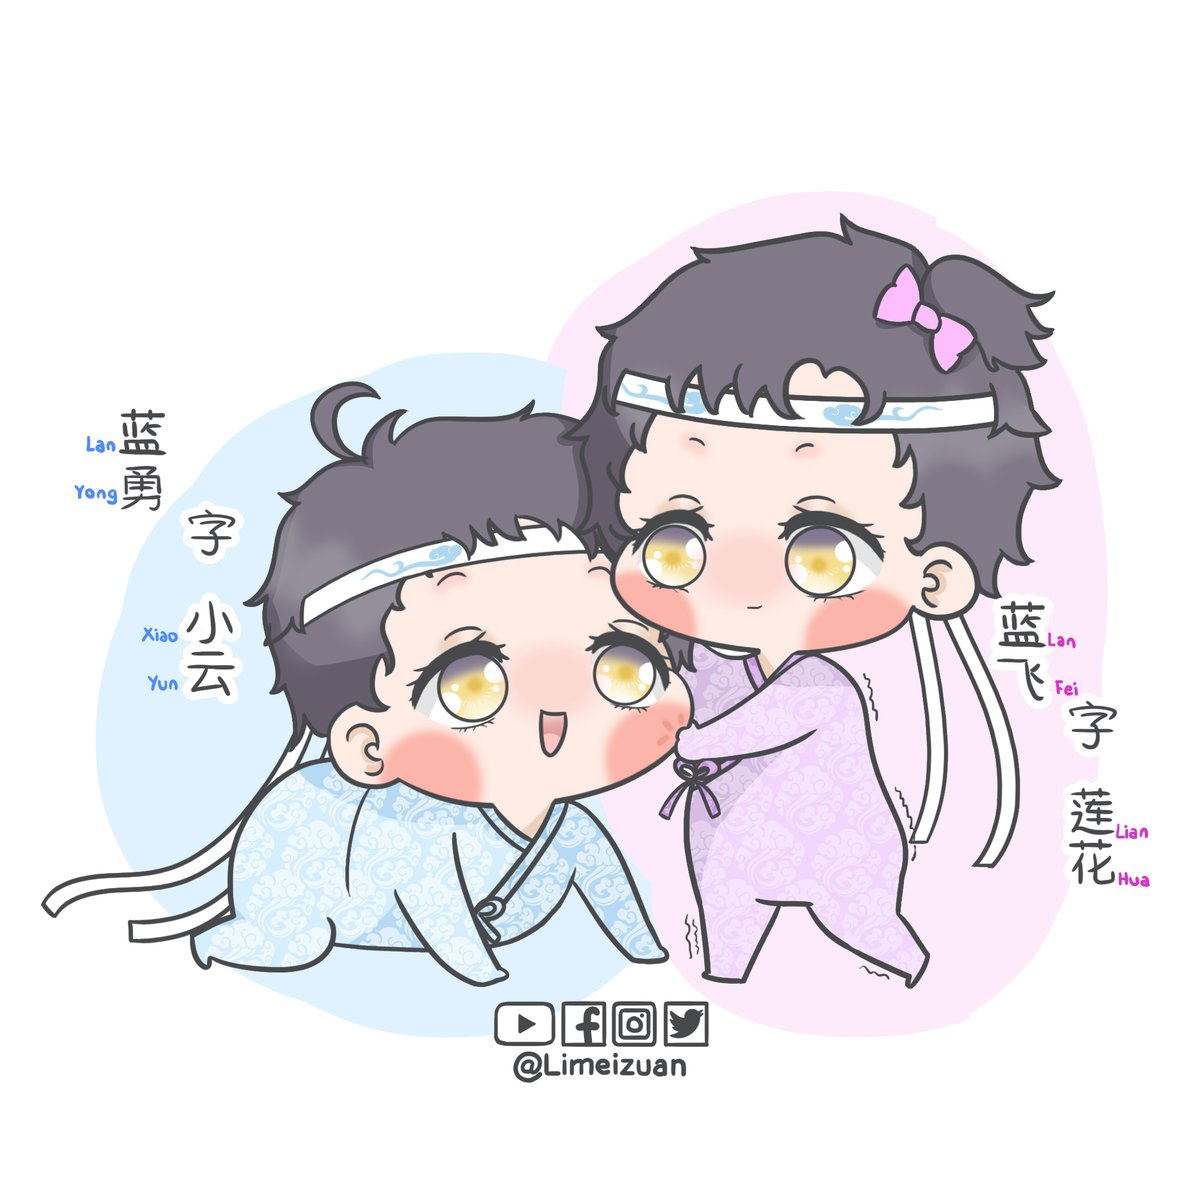 Chap 16[WangXian Mpreg]"Introduction"Jiejie try to stand. Didi's cheek look delicious NOTE HuaHua is the older twin Their eyes are mix of WWX and LWJ's color. Mostly Lanzhan's gold #魔道祖师  #陈情令  #Modaozushi  #mdzs  #chibi  #fanart  #mpreg  #Bǎobǎo  #omegaverse  #baby